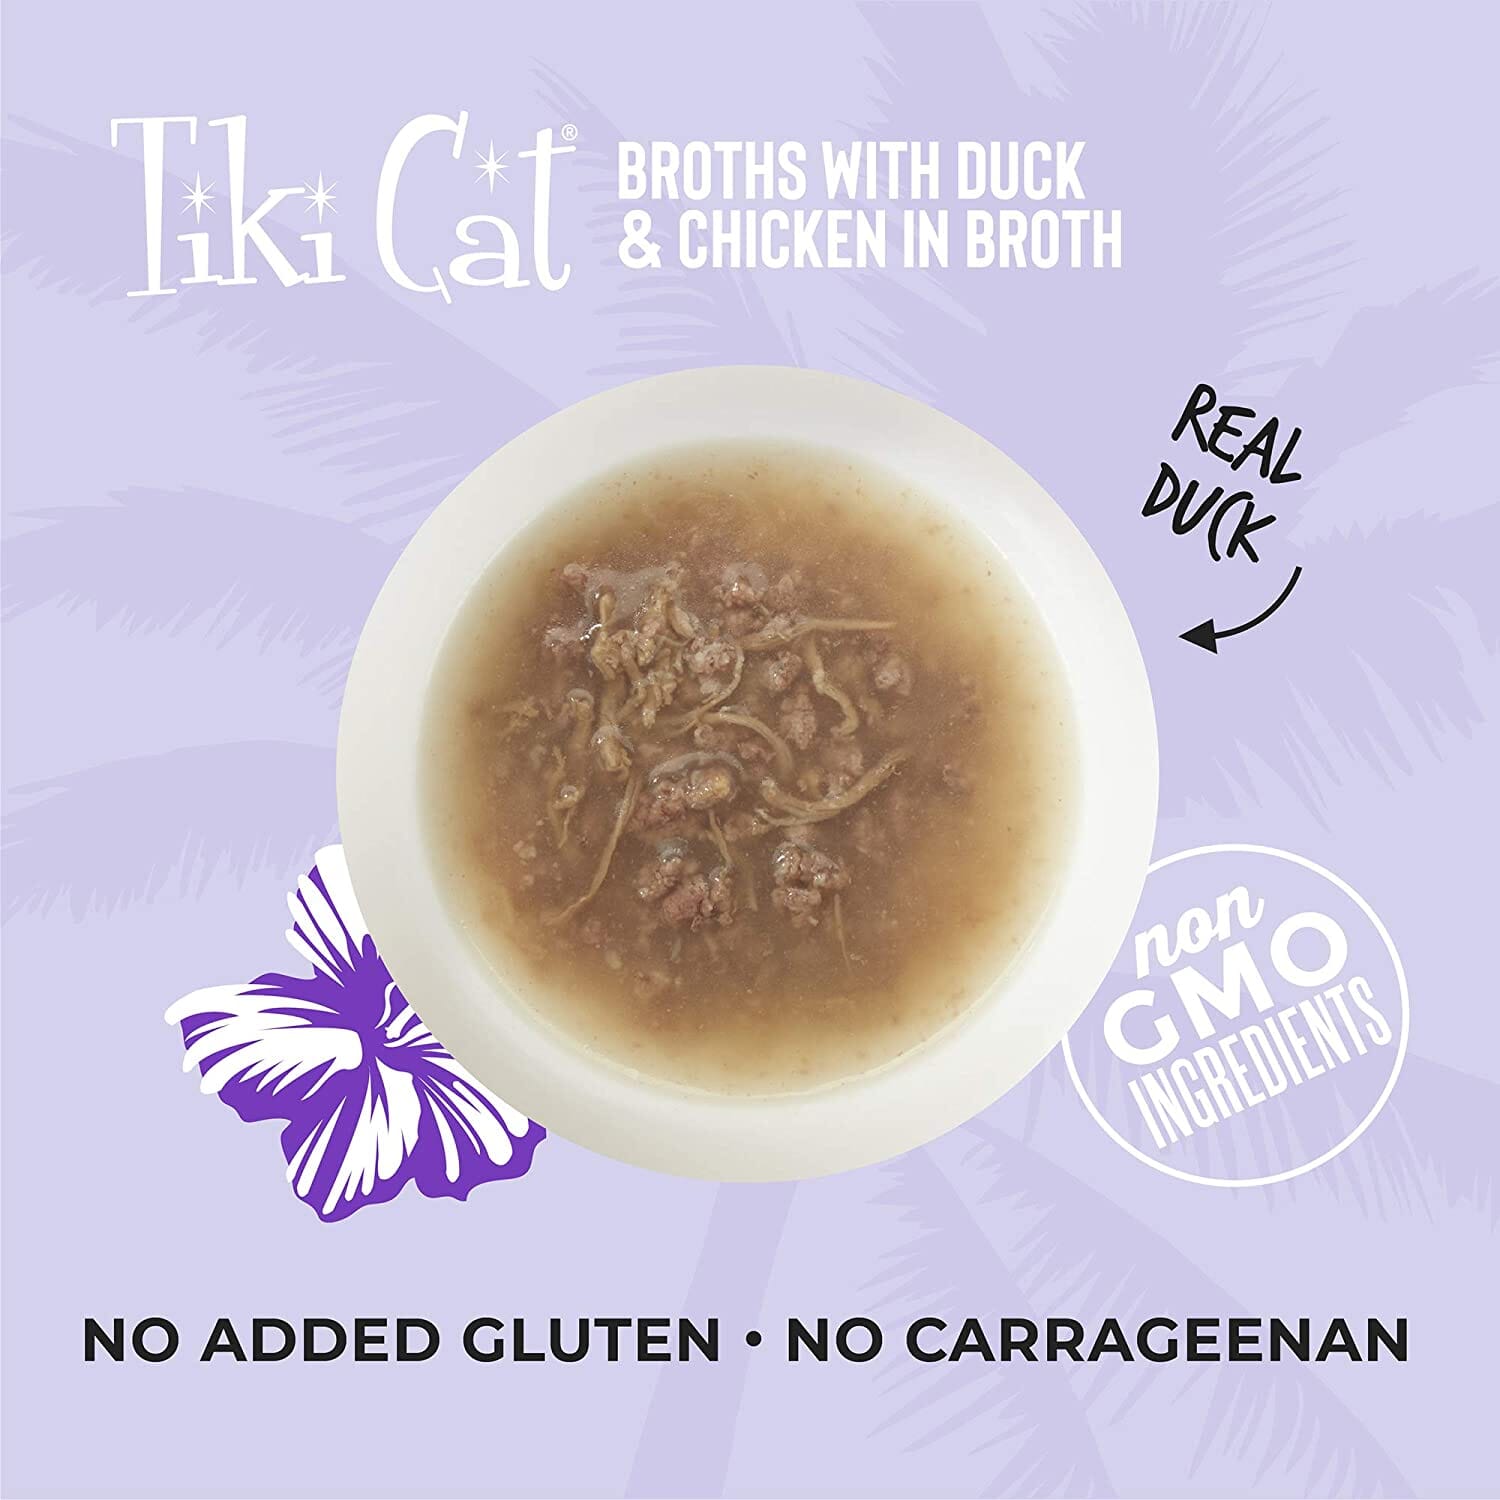 Tiki Cat Duck & Chicken Broth Cat Food Toppers - 1.3 Oz Pouch - Pack of 12  